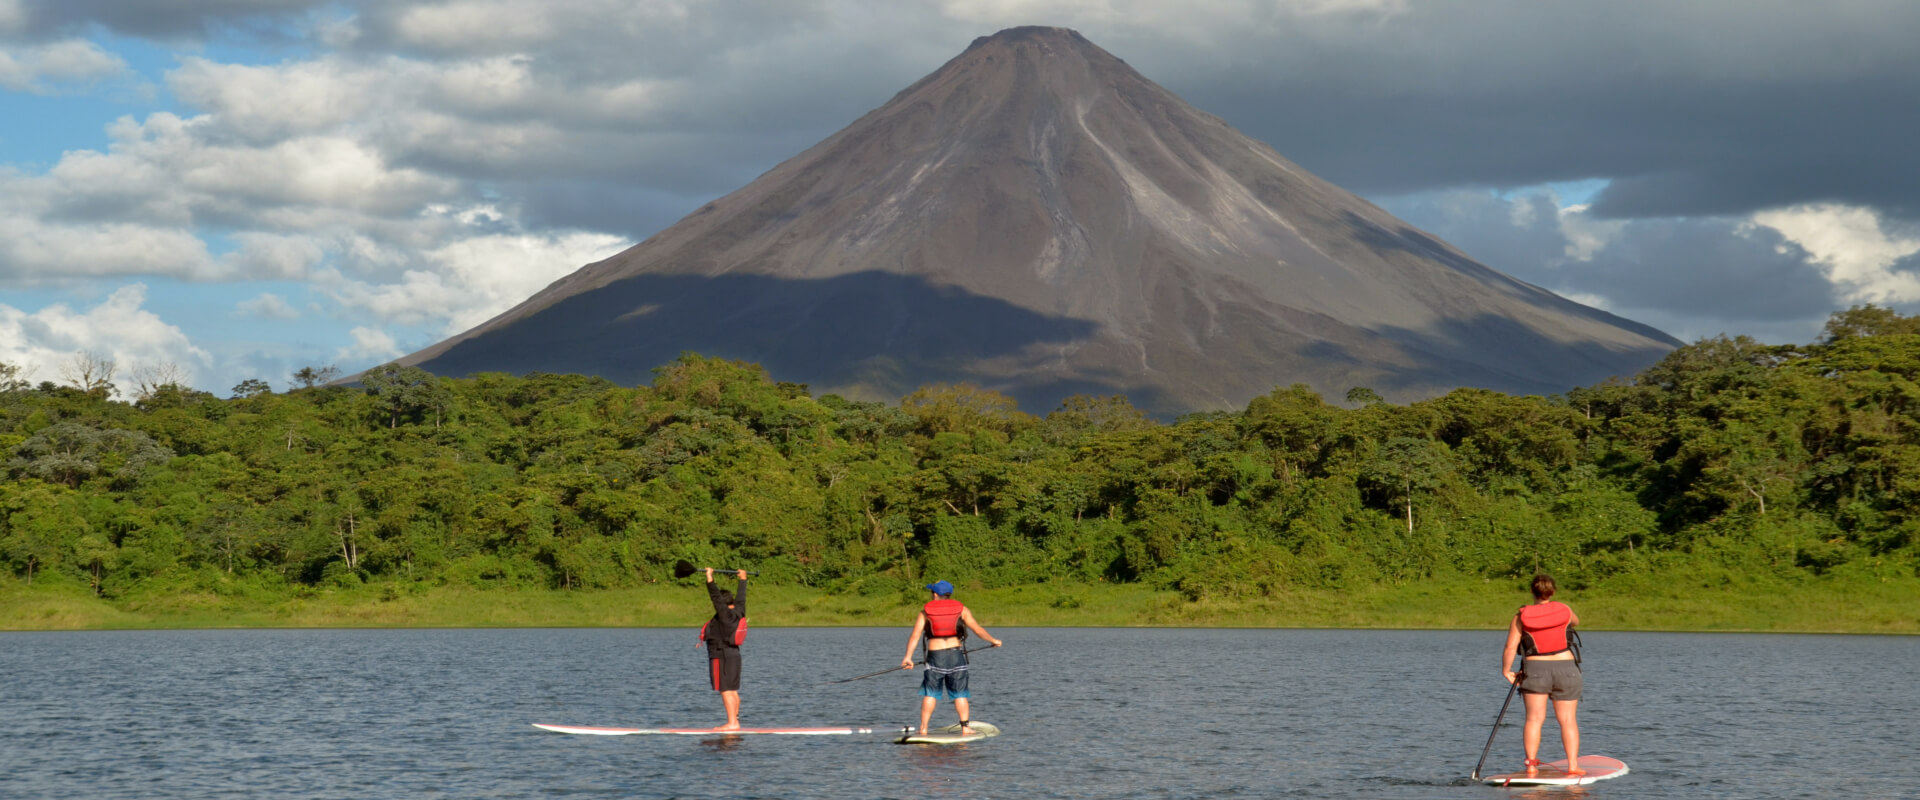 Stand Up Paddle (SUP) en el Lago Arenal | Costa Rica Jade Tours